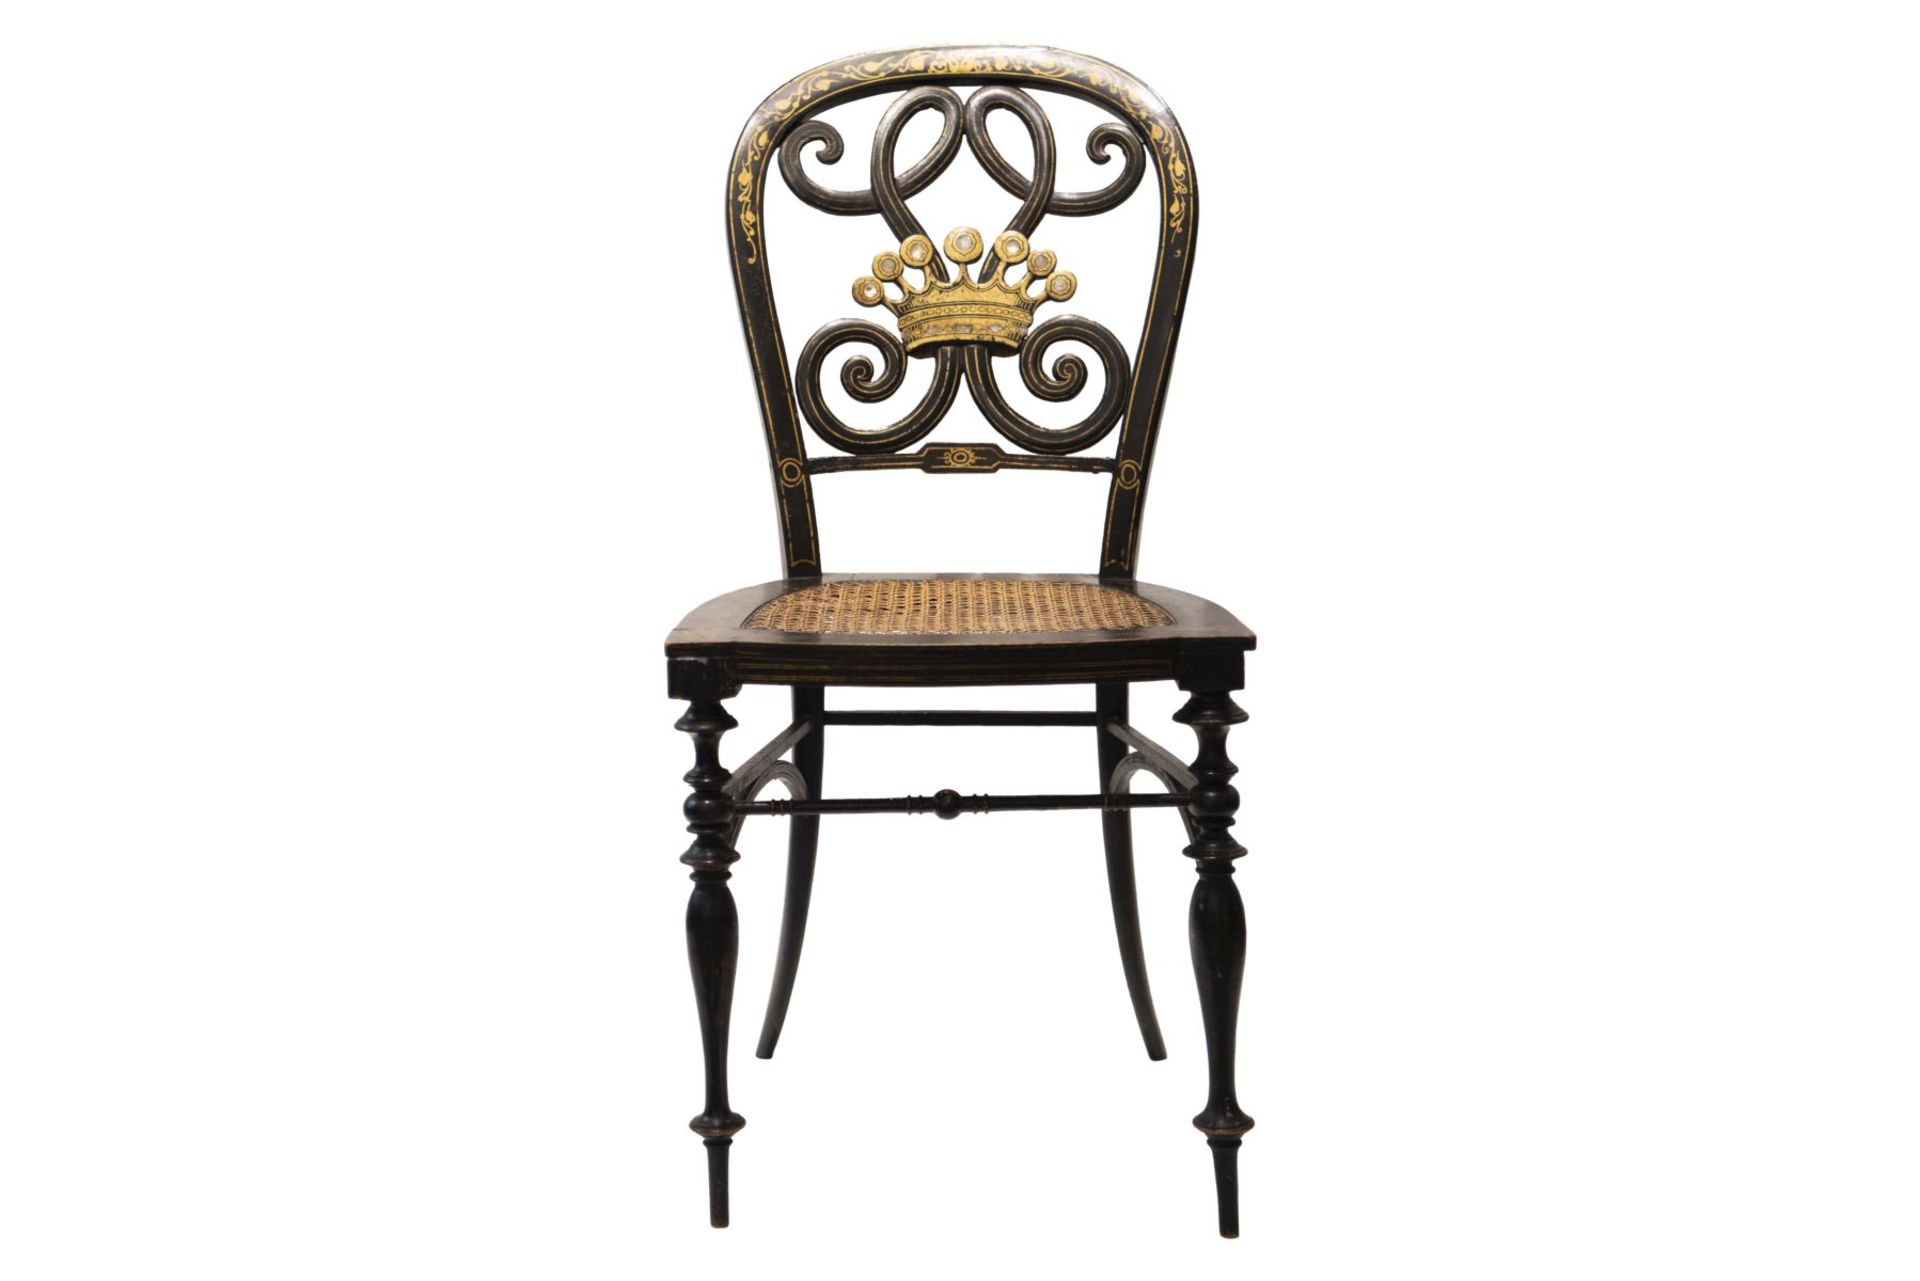 Decorative chair, French Chinoiserie